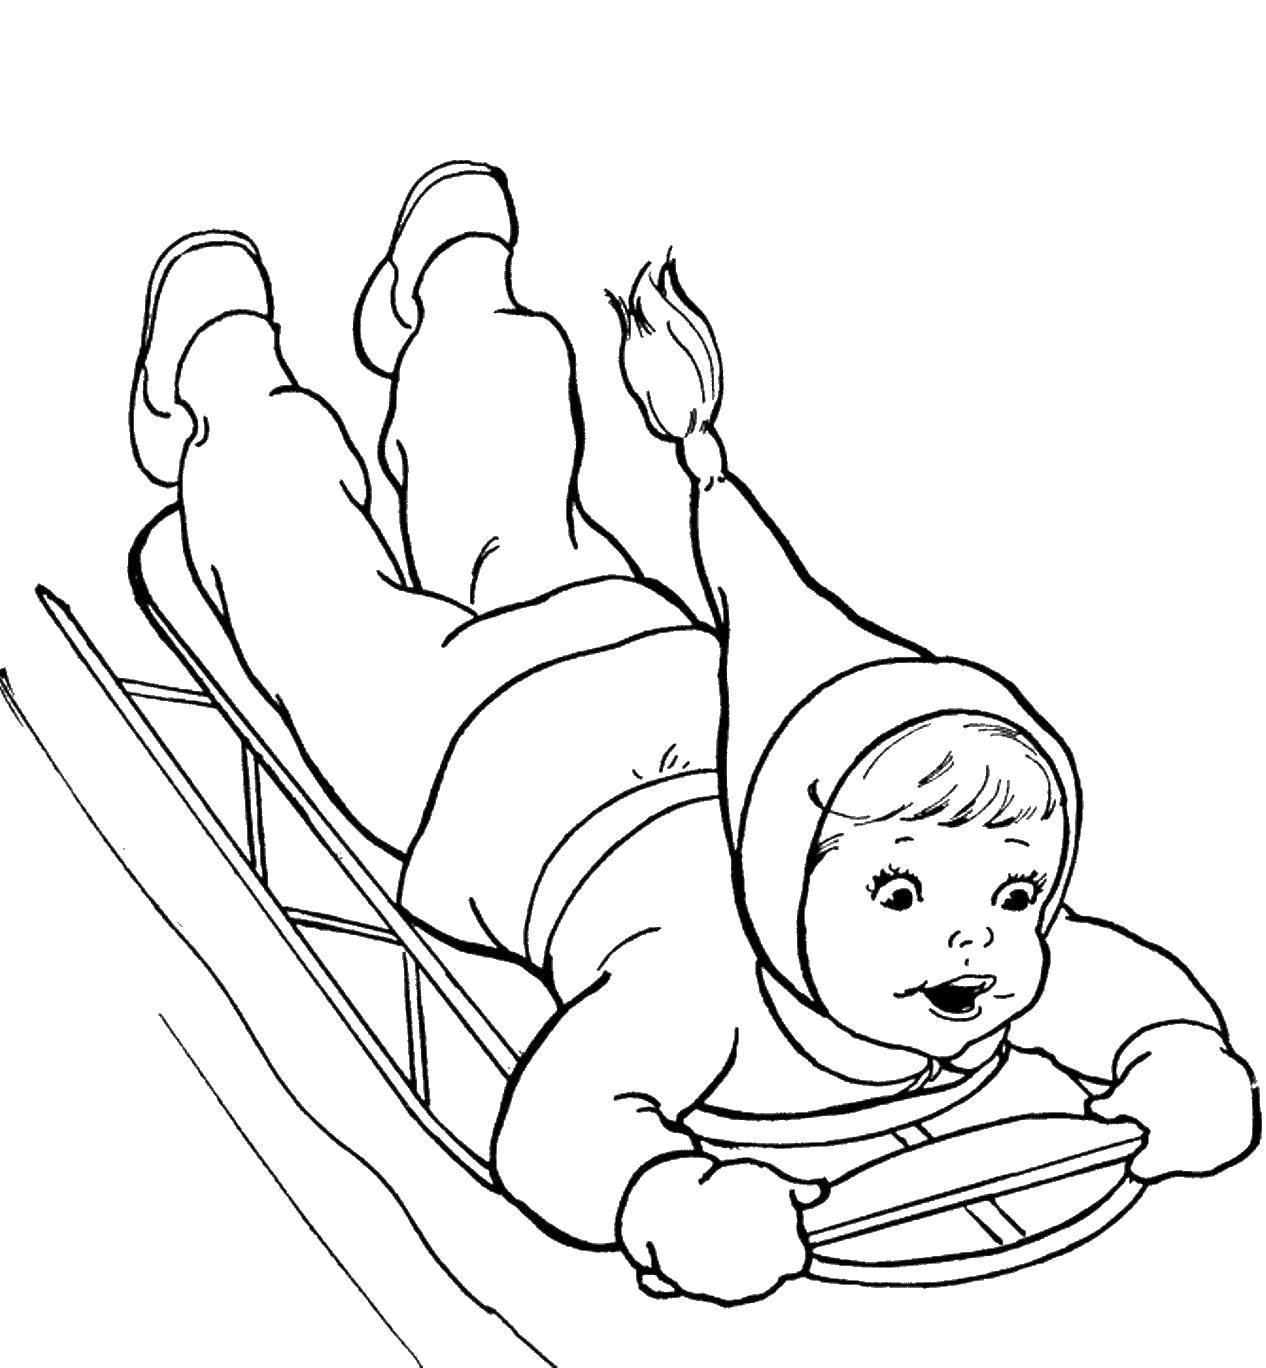 Coloring A child riding a sled. Category winter. Tags:  winter, sled, child.